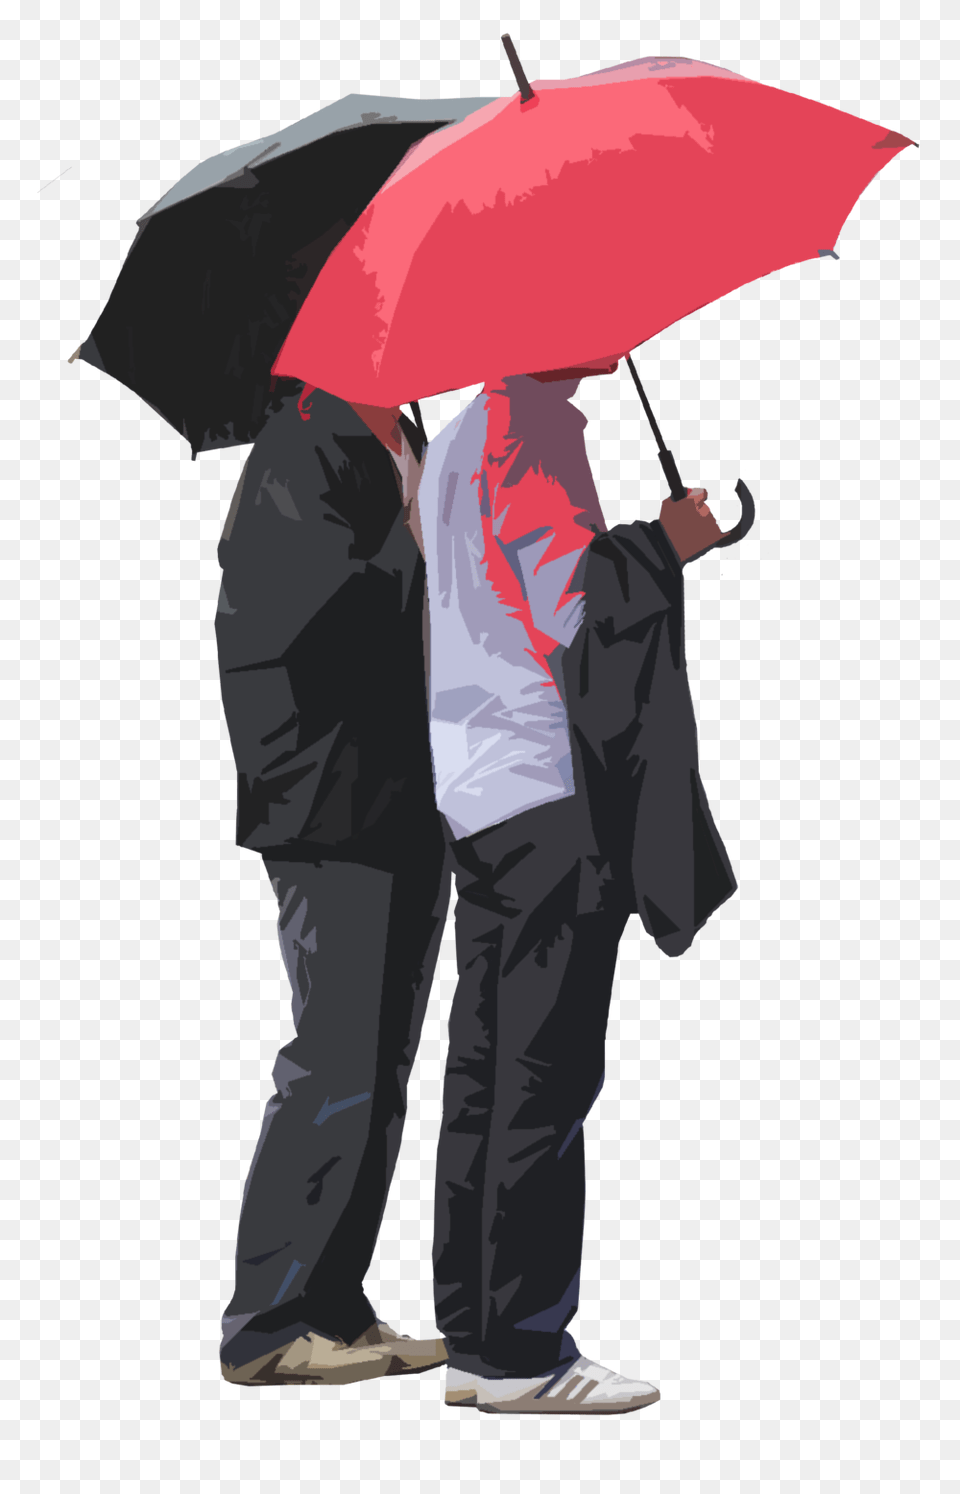 Rain People Cutout Cut Out People People Render People In Rain, Clothing, Coat, Canopy, Adult Png